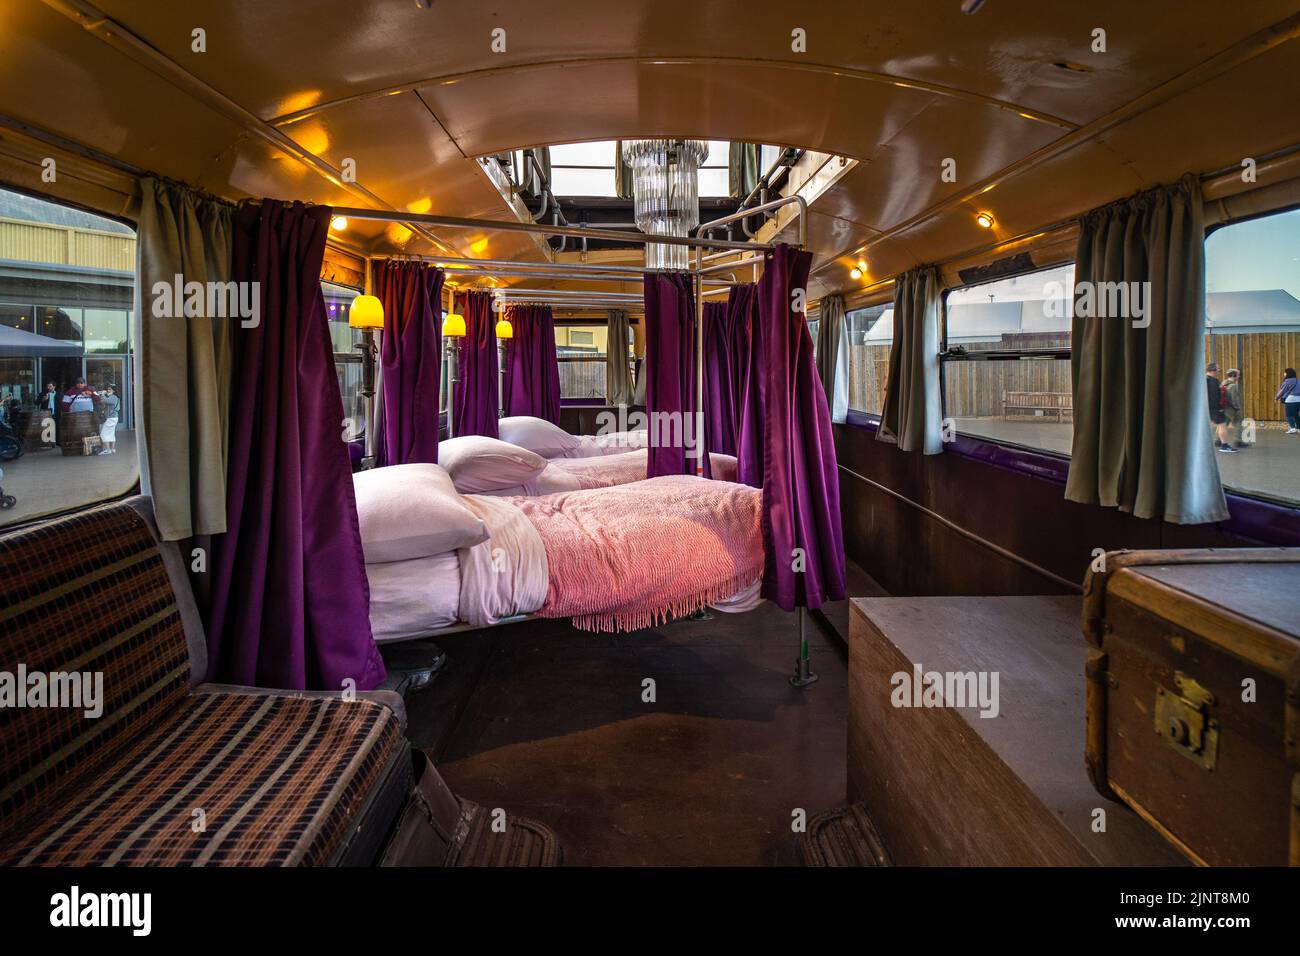 London, UK - 10 June 2022:  The Knight Bus of The Prisoner of Azkaban movie from inside; Comfortable travel bus with beds inside Stock Photo